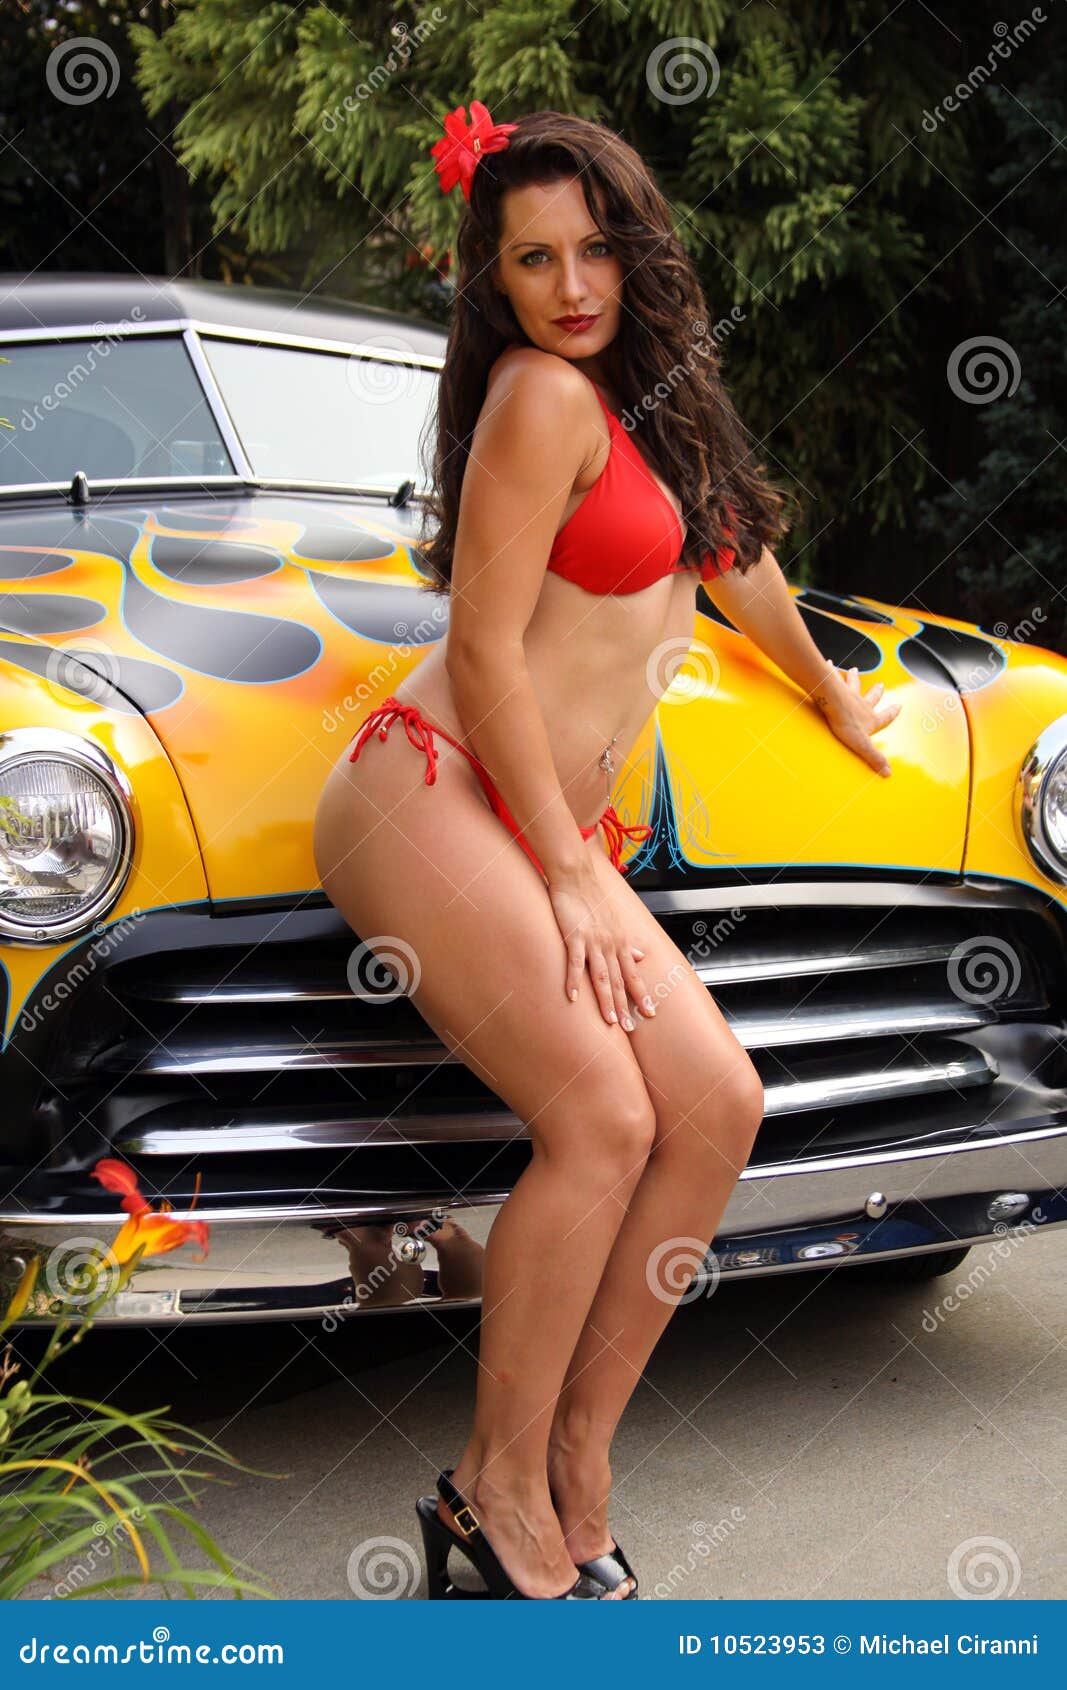 alicia connolly recommends hot rods and hot babes pic